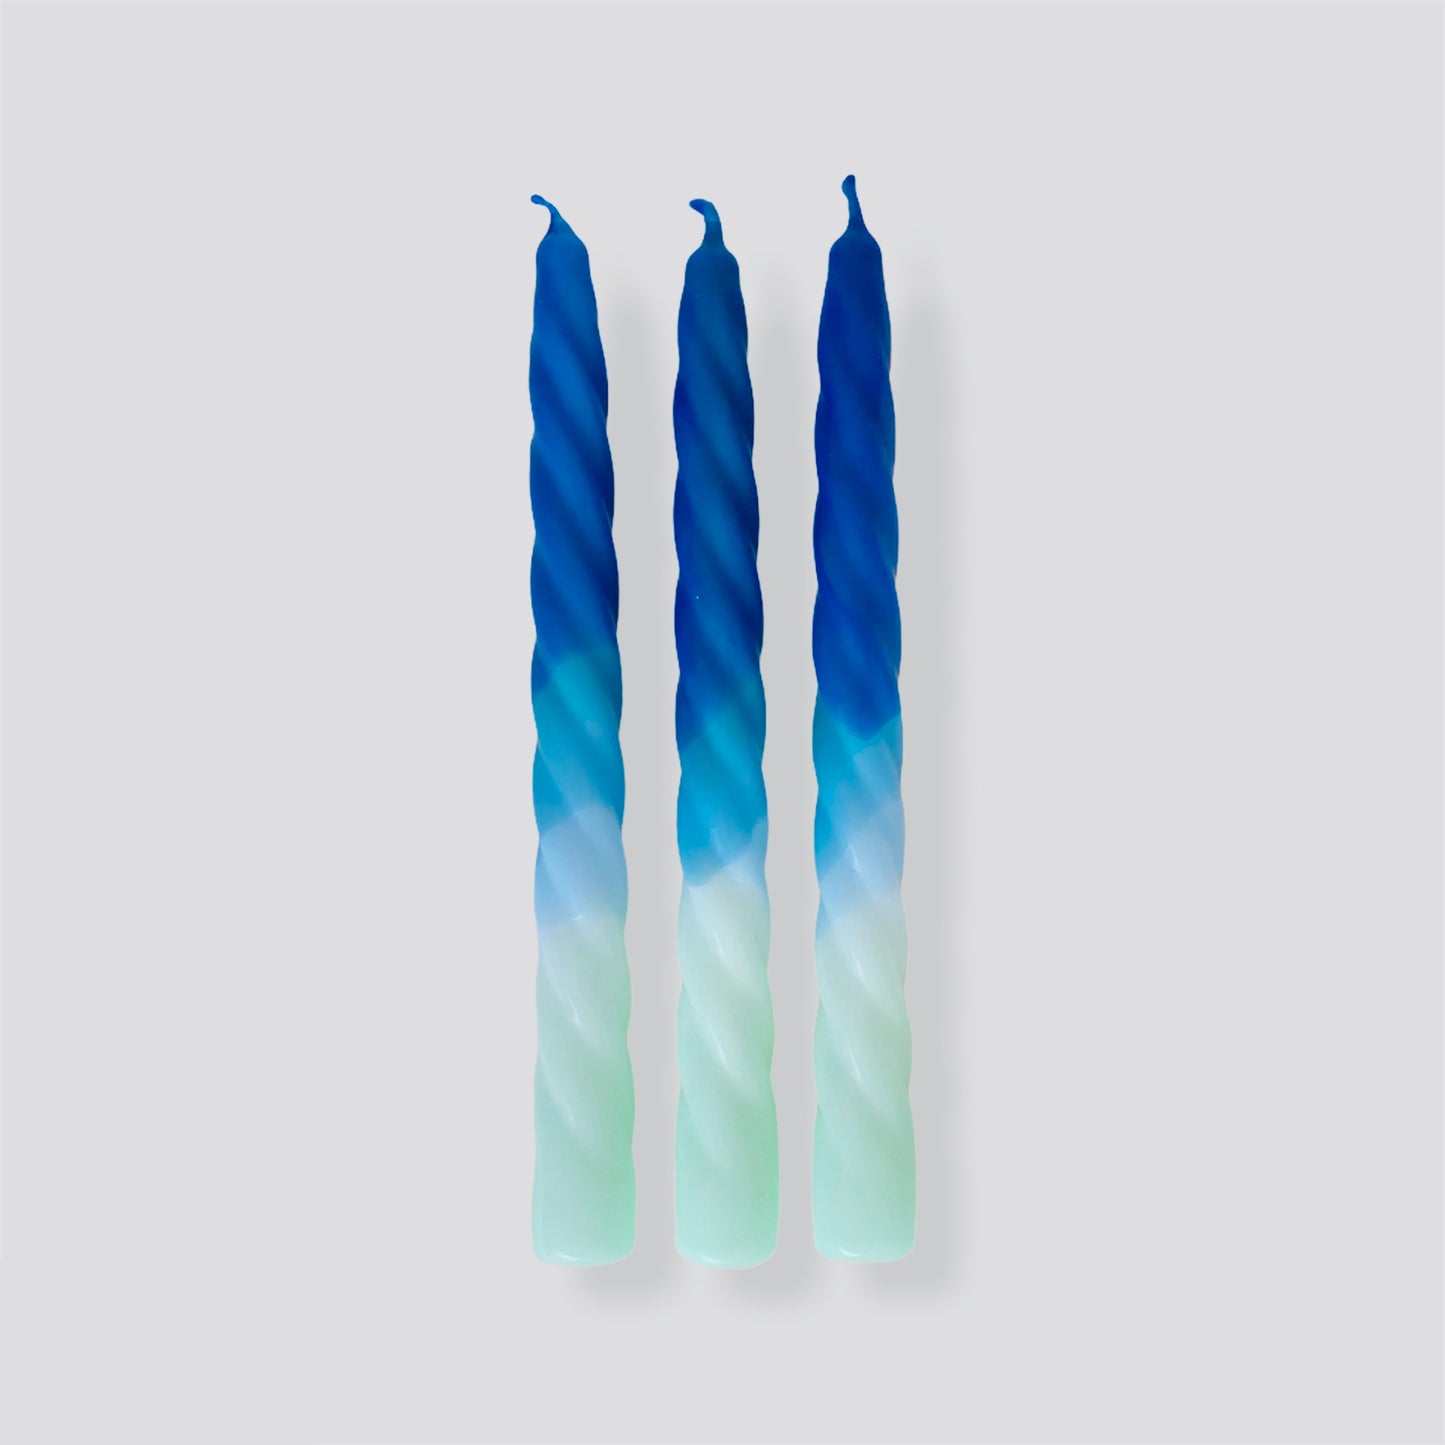 Dip Dyed Neon Twisted Dinner  Candles - Shades of Blueberry